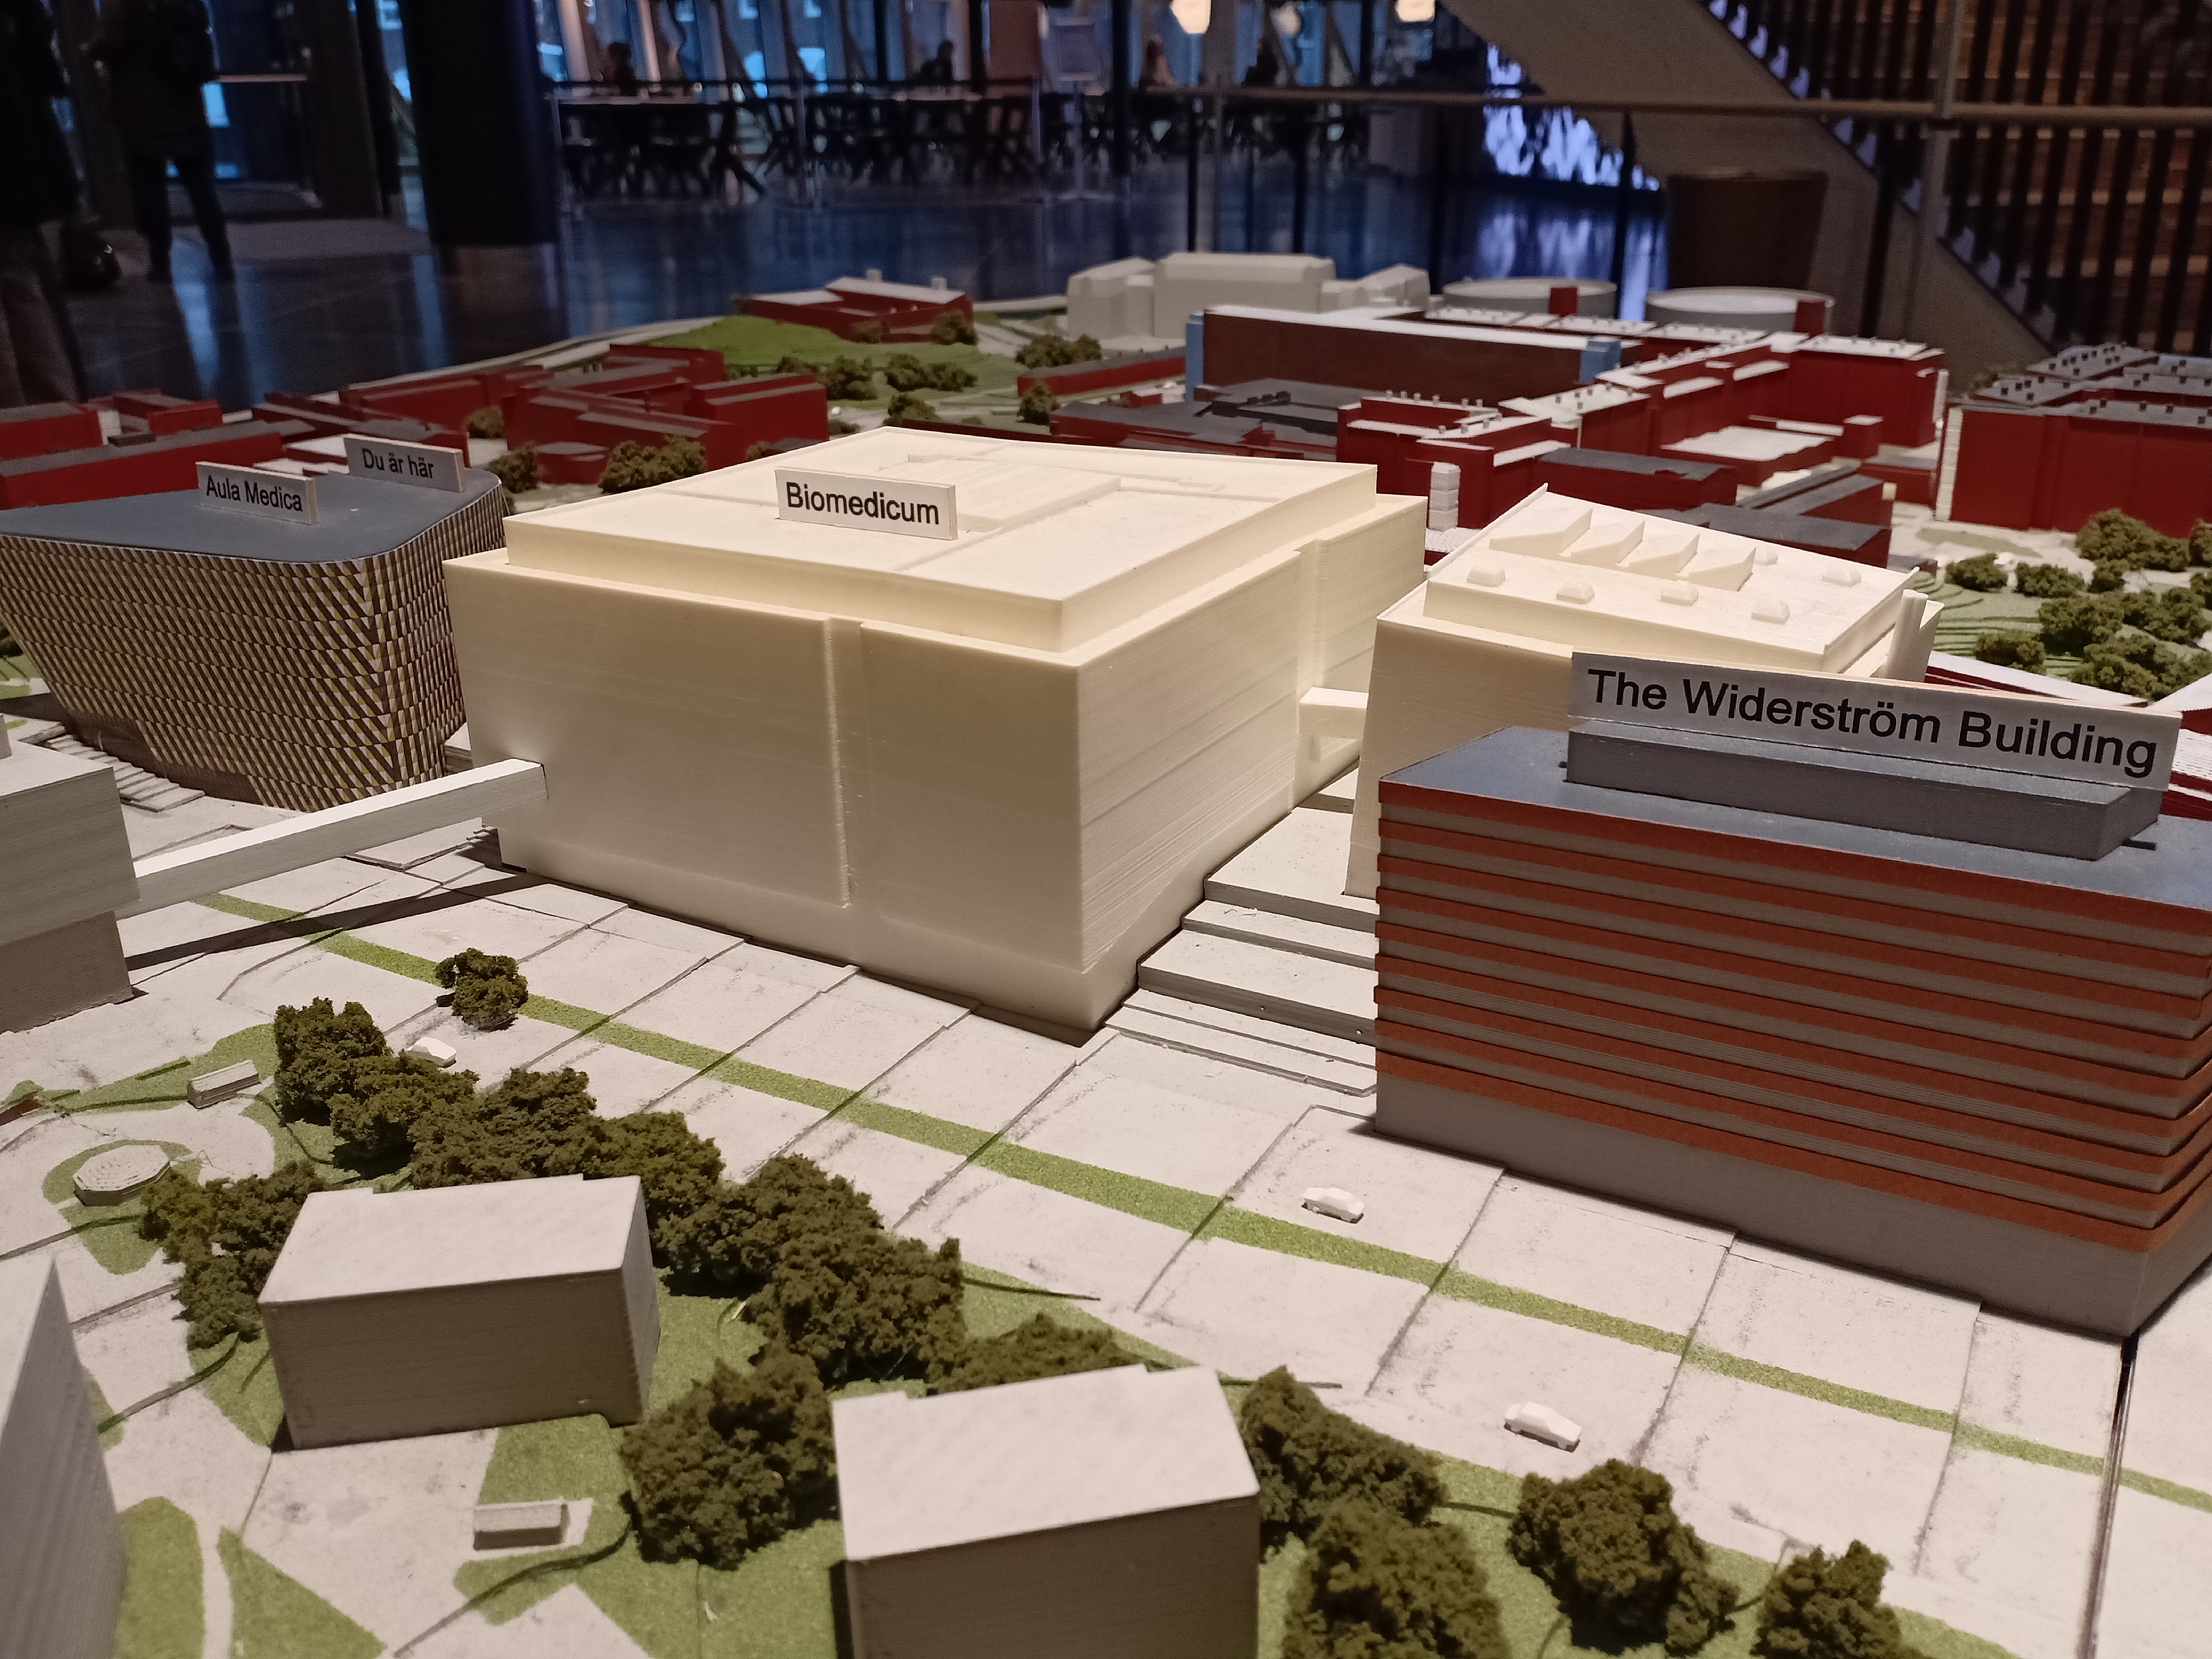 Picture showing three minianture building models, each name writtent on top of the model, from left to right: Aula Medica, Biomedicum, and The Widerström Building